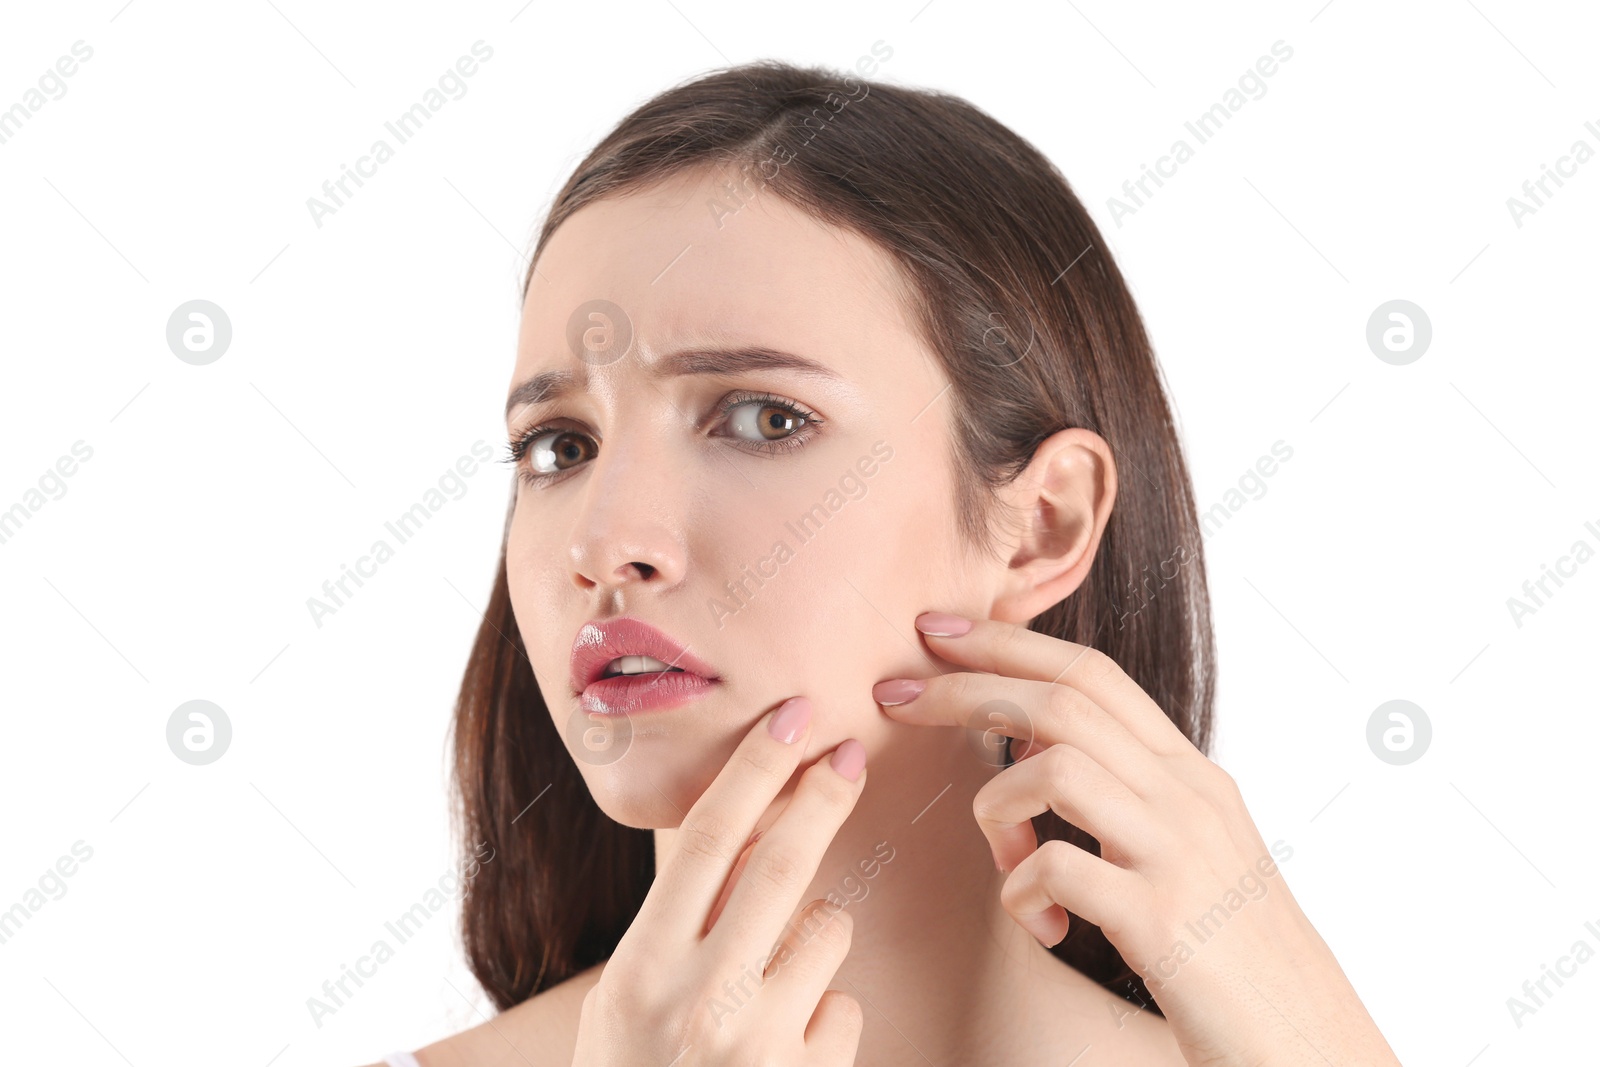 Photo of Teenage girl with acne problem against white background